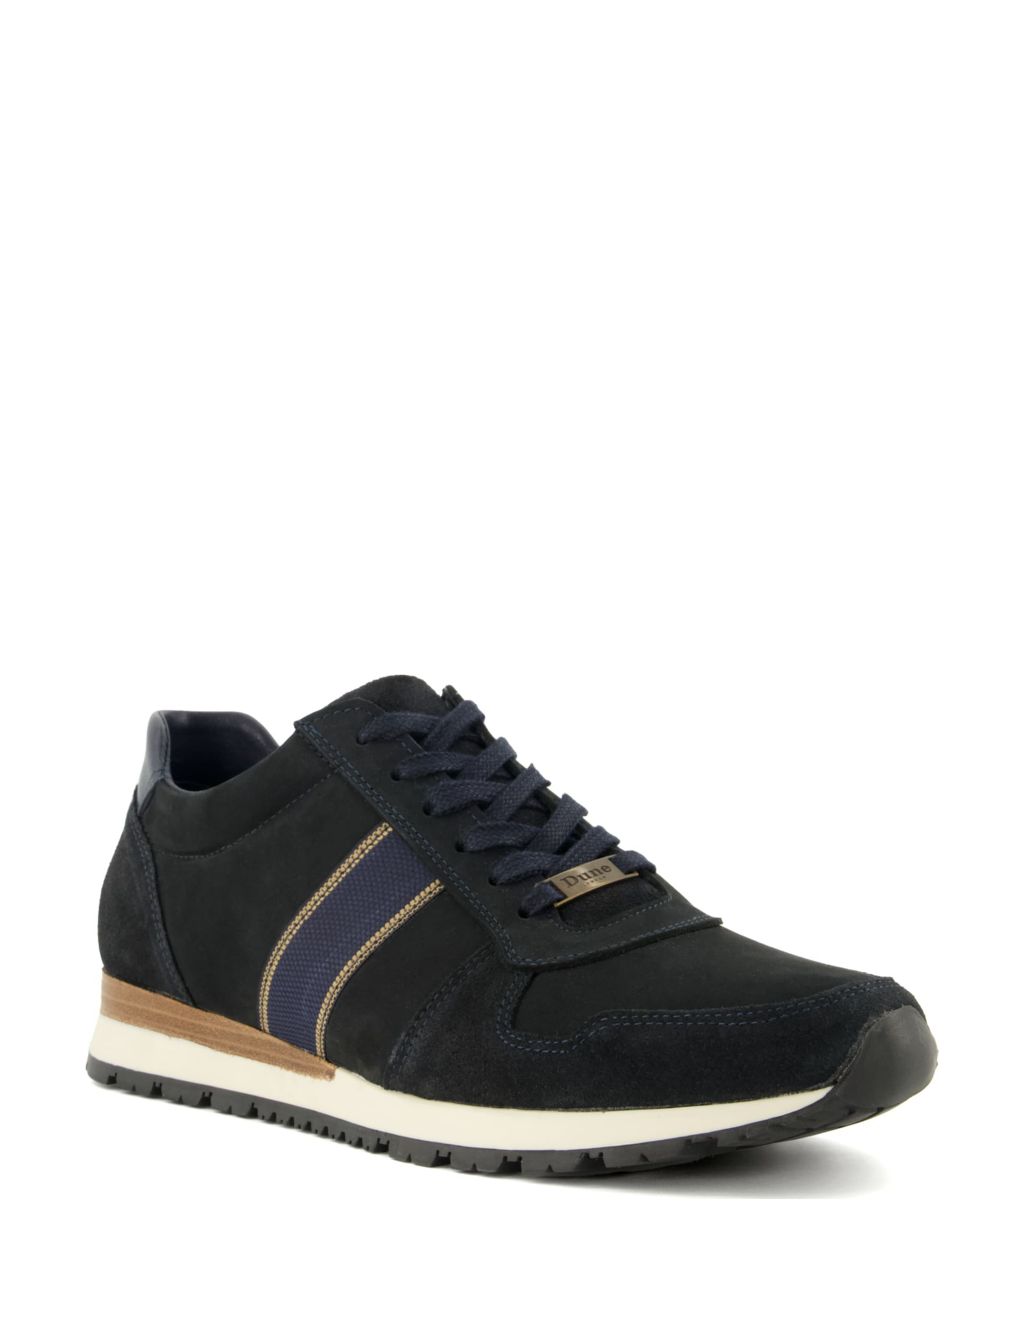 Leather Lace Up Stripe Trainers image 2